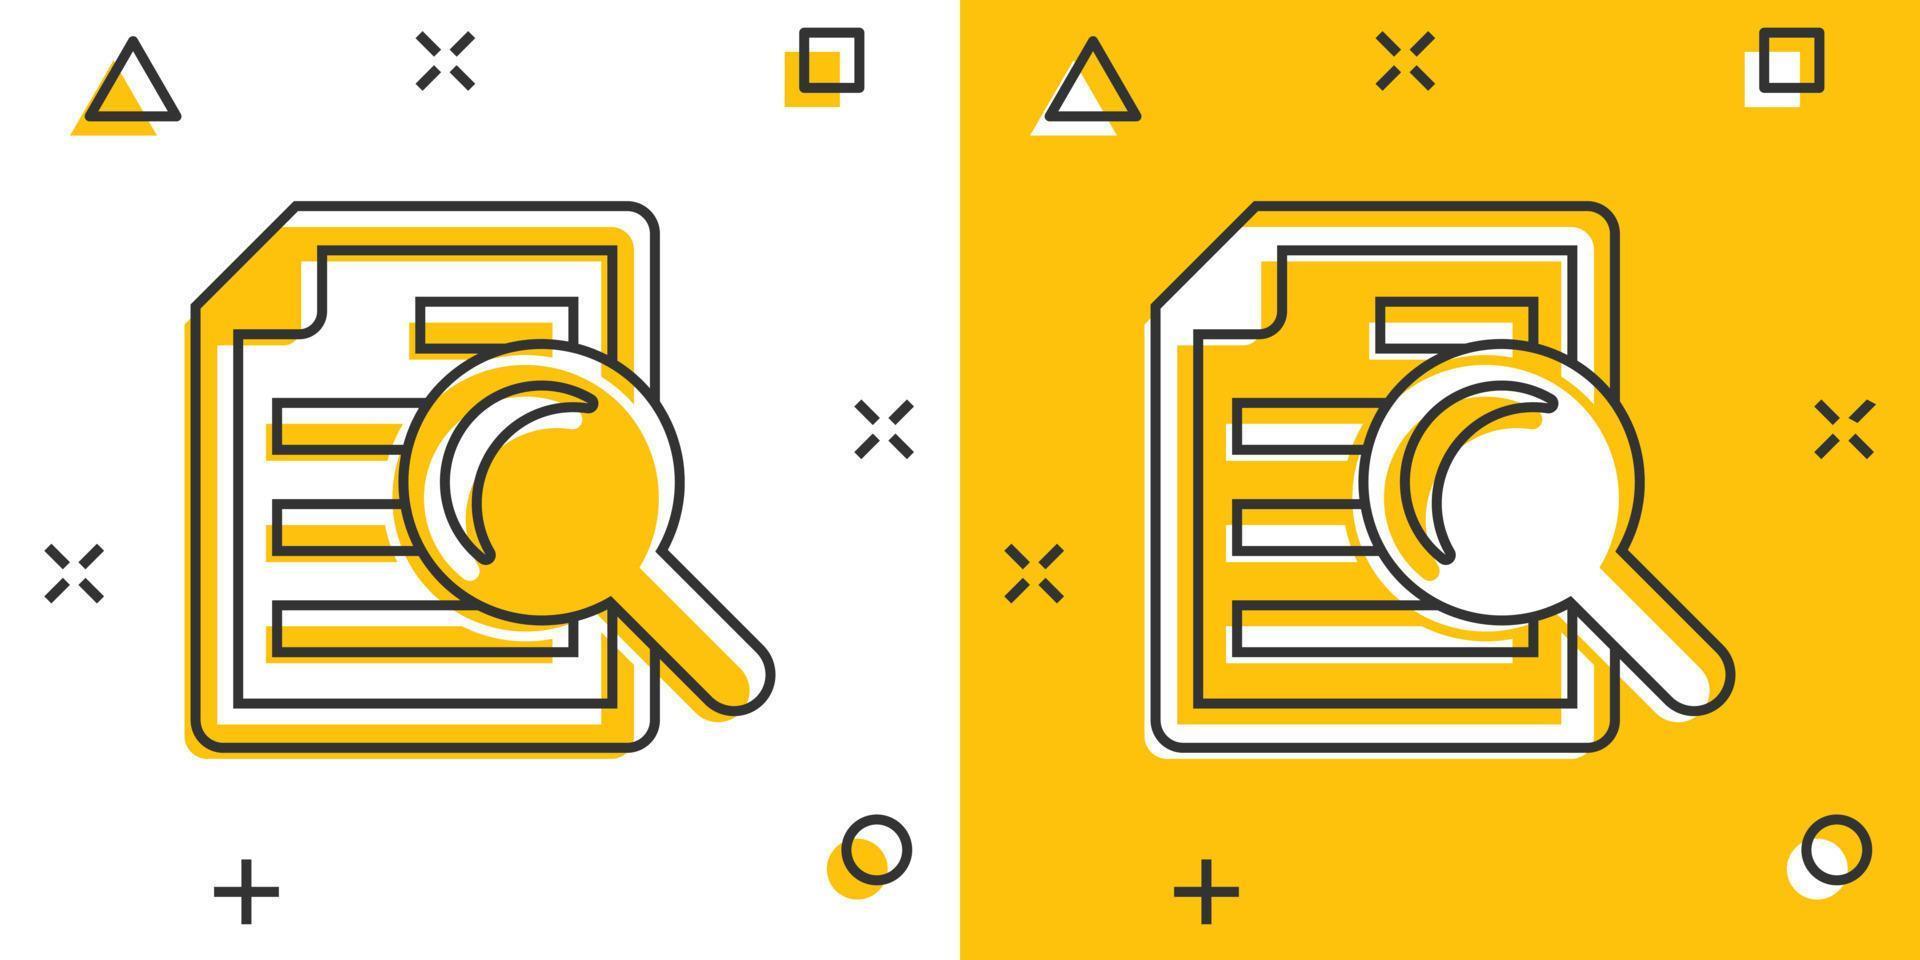 Scrutiny document plan icon in comic style. Review statement vector cartoon illustration pictogram. Document with magnifier loupe business concept splash effect.